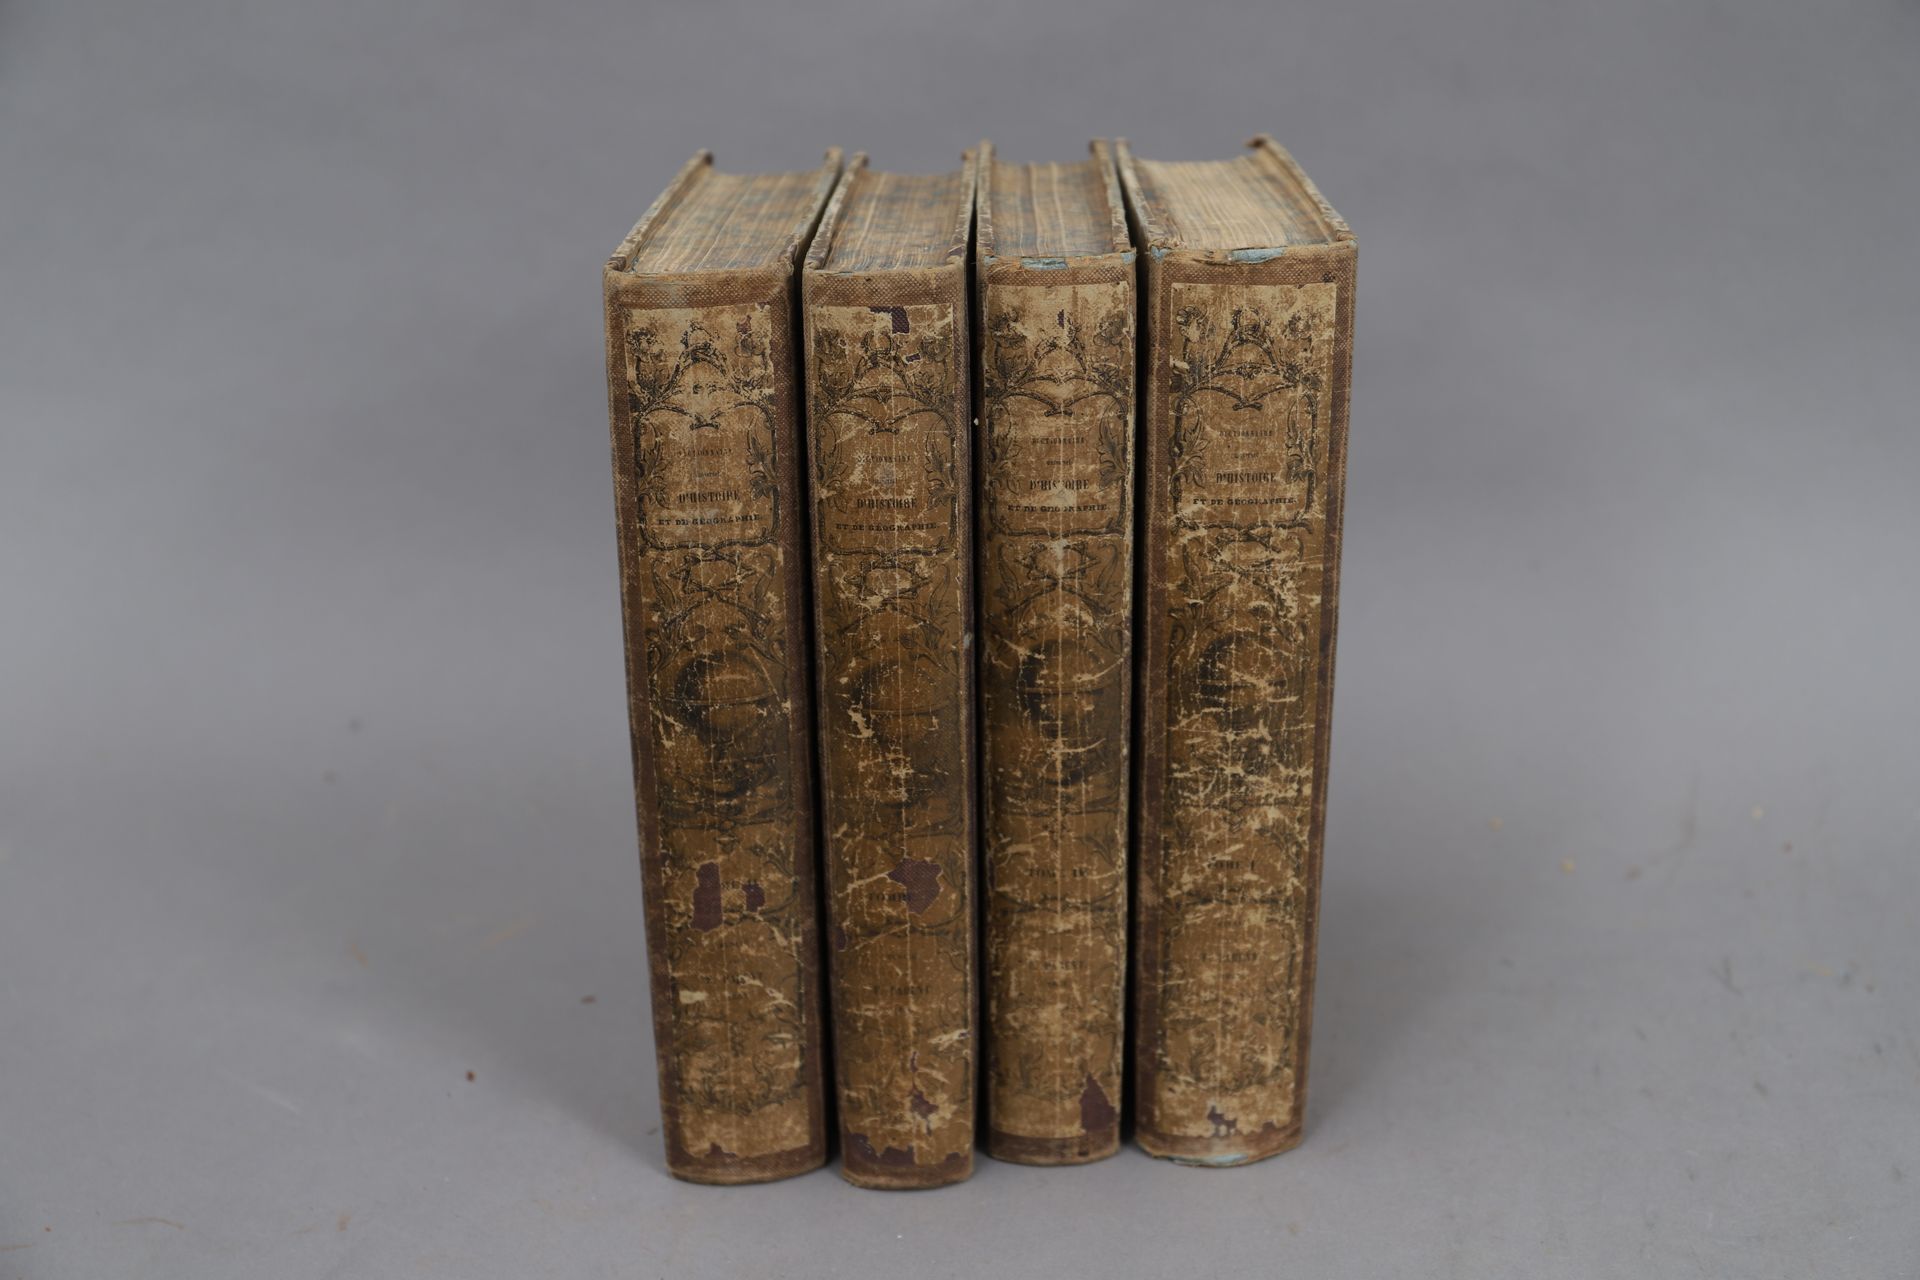 Null DICTIONARY of HISTORY and GEOGRAPHY by DOUILLET

4 bound volumes.